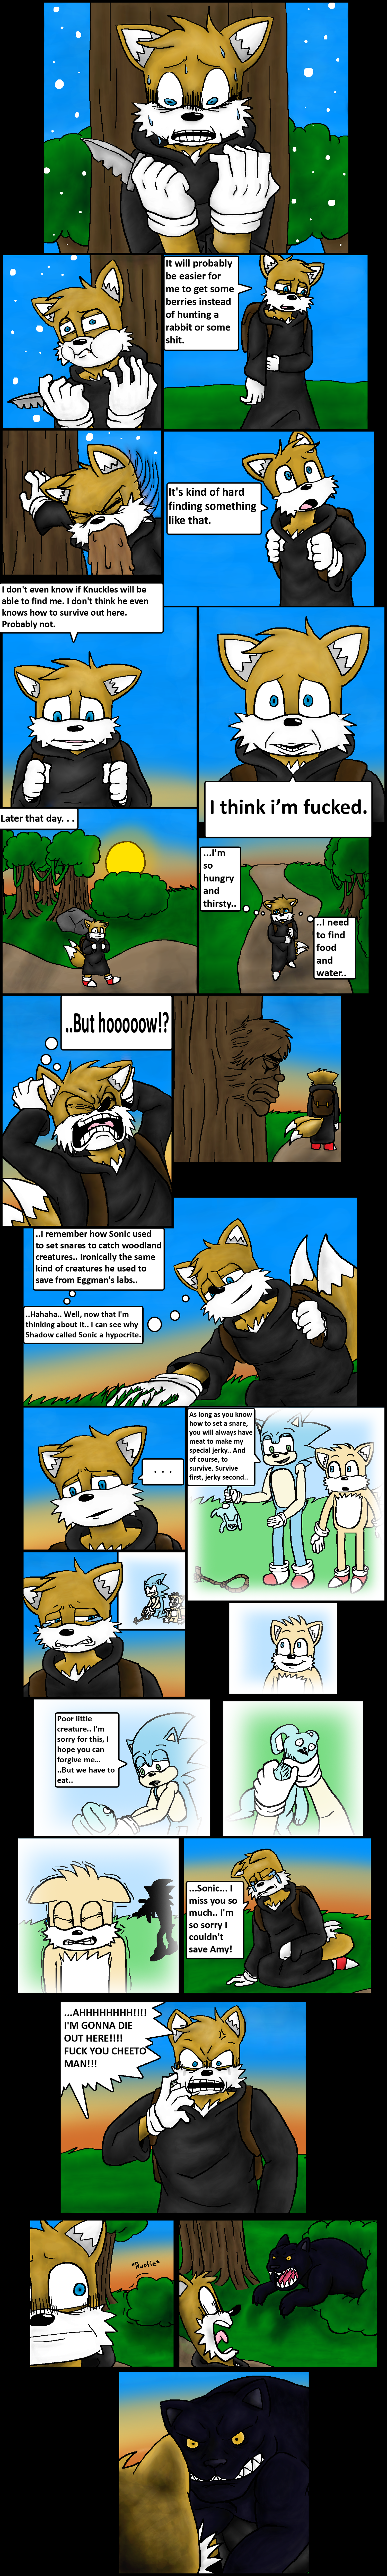 ch26/pg27.png. If you're seeing this, enable images. Or, perhaps we have a website issue. Try refreshing, if unsuccessful email c@commodorian.org with a detailed description of how you got here.